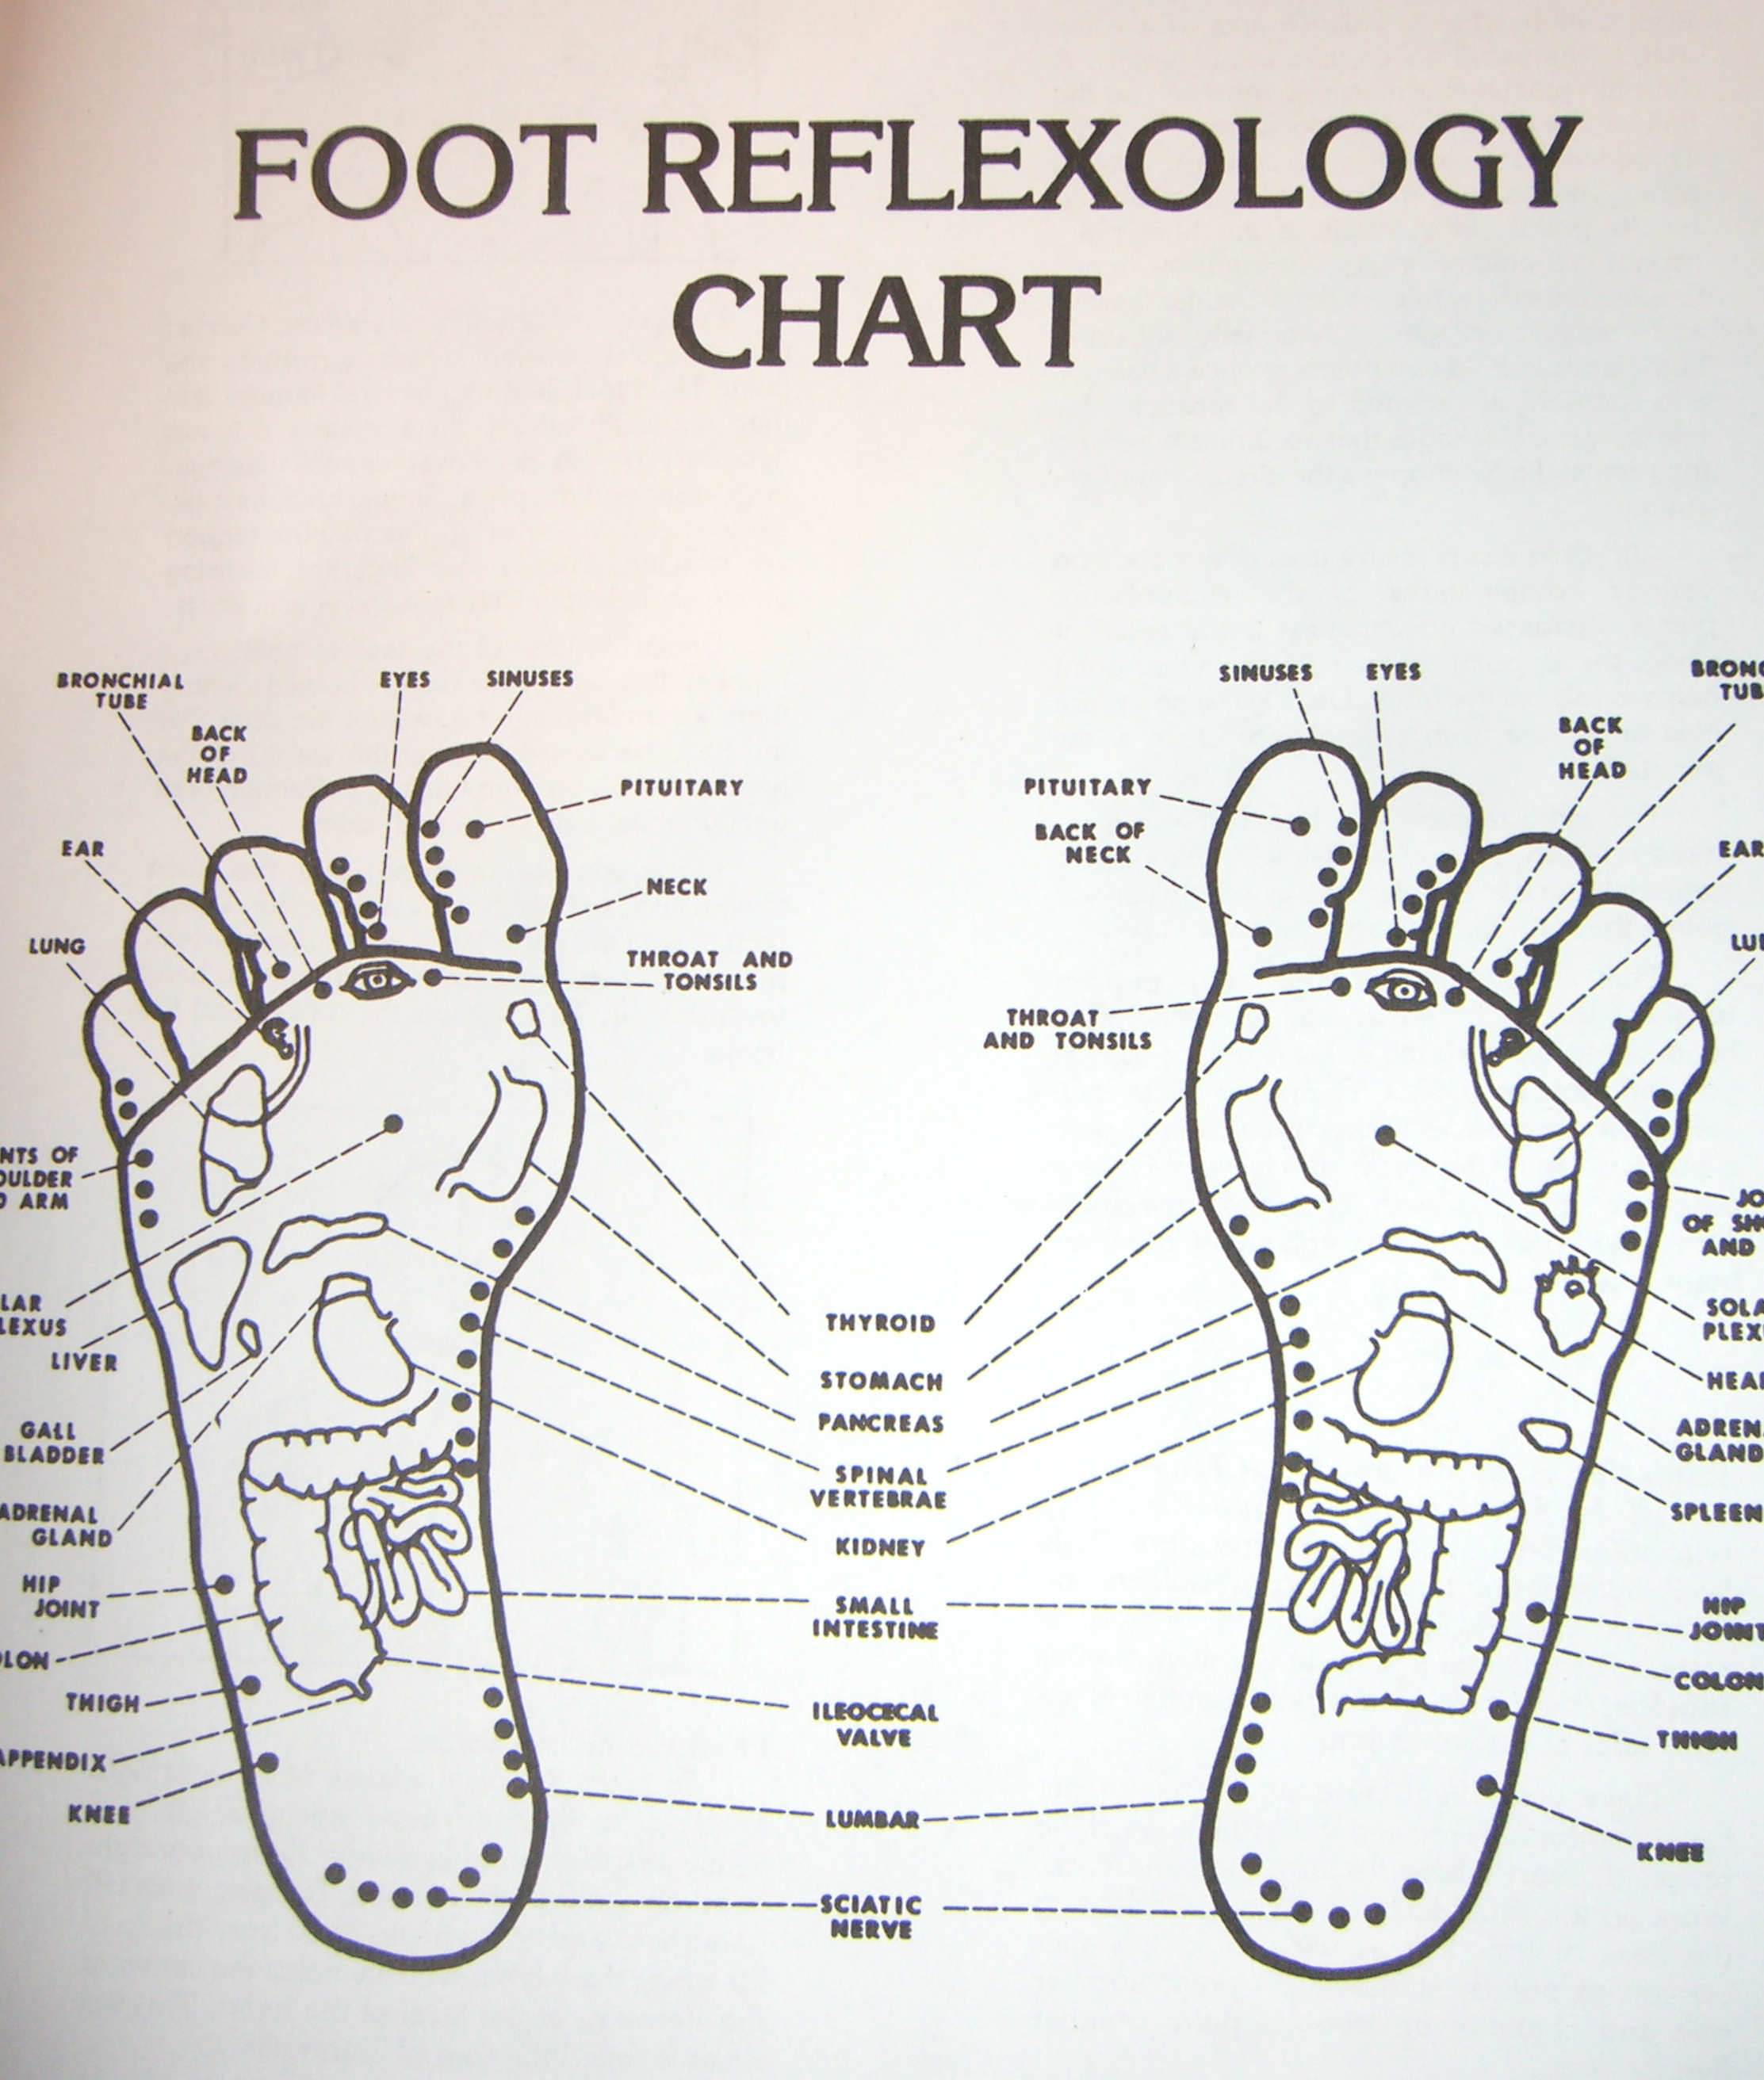 introduction-to-acupressure-points-qi-gong-self-acupressure-acupressure-points